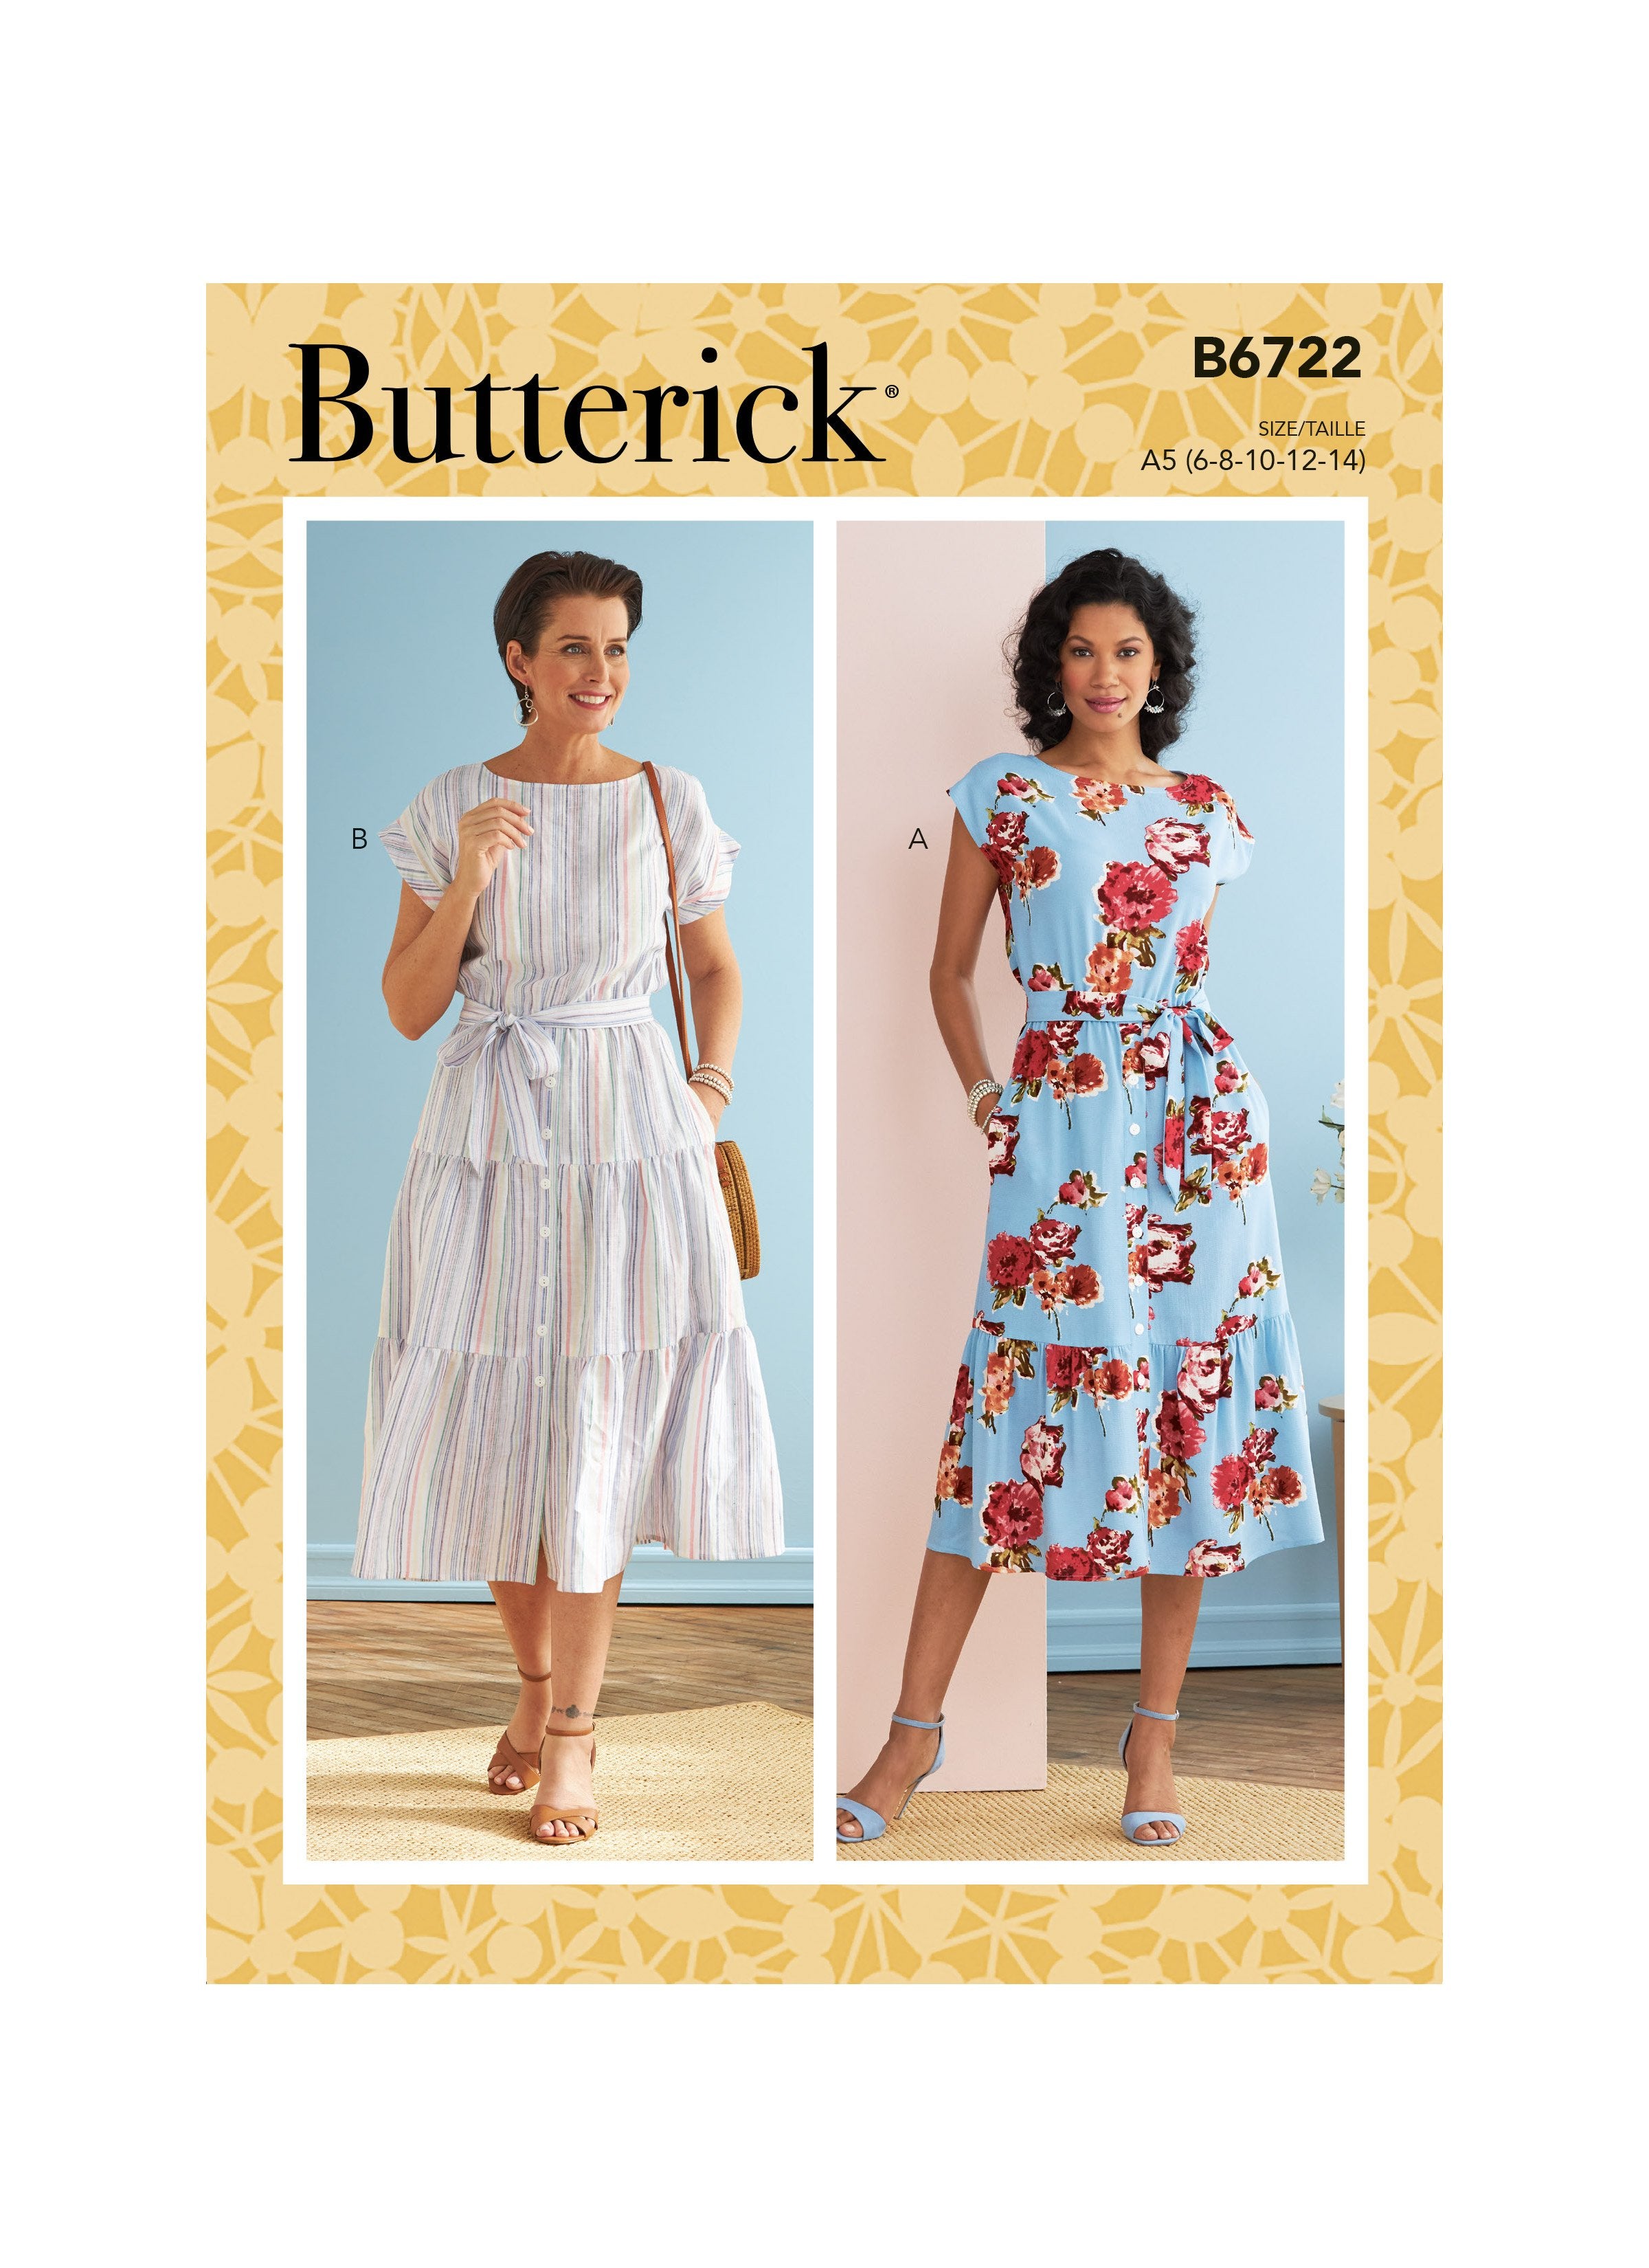 Butterick Sewing Pattern 6722 Misses' Dresses from Jaycotts Sewing Supplies